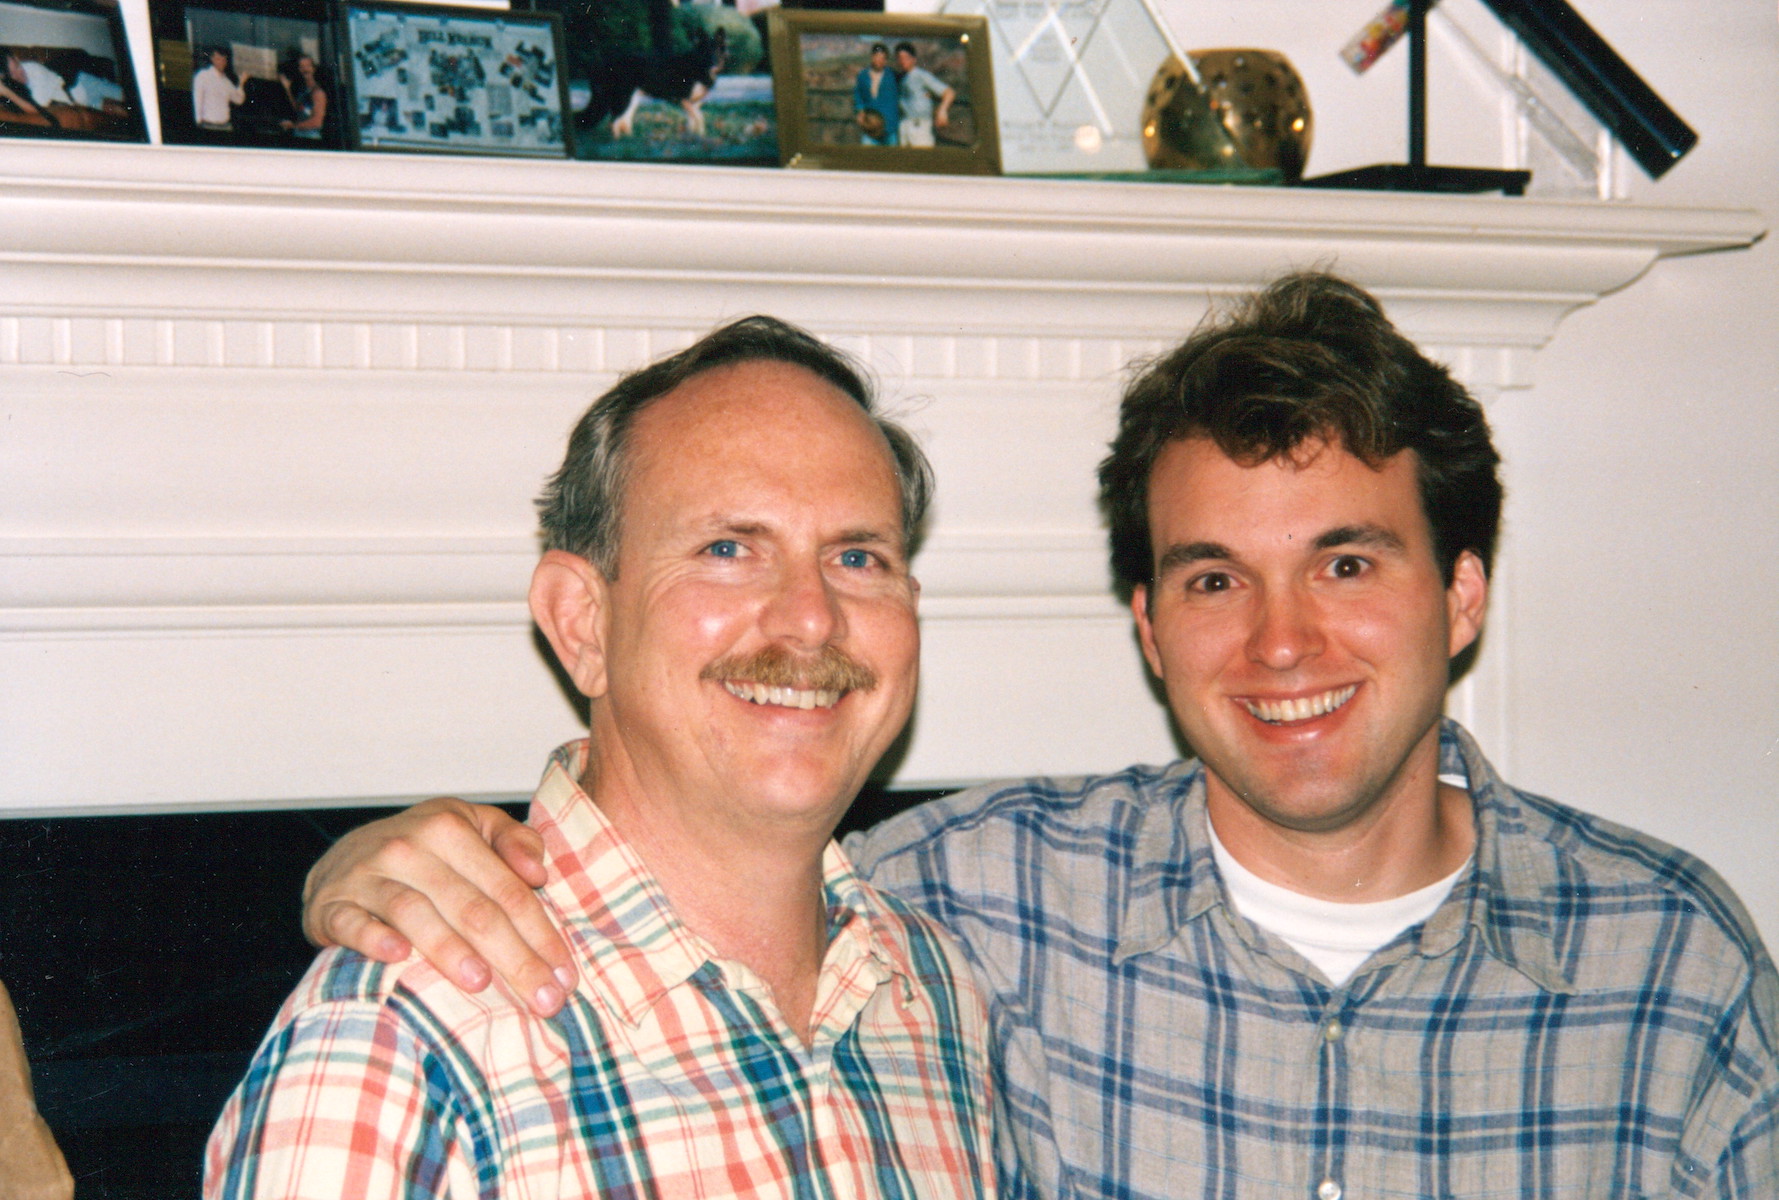 William Waybourn and close friend Eric Fanning in Washington, DC, circa 1994. William shares, “Fanning later became the highest ranking LGBT person in the Pentagon as the first “out” Secretary of the Army.” Photo courtesy of William Waybourn.